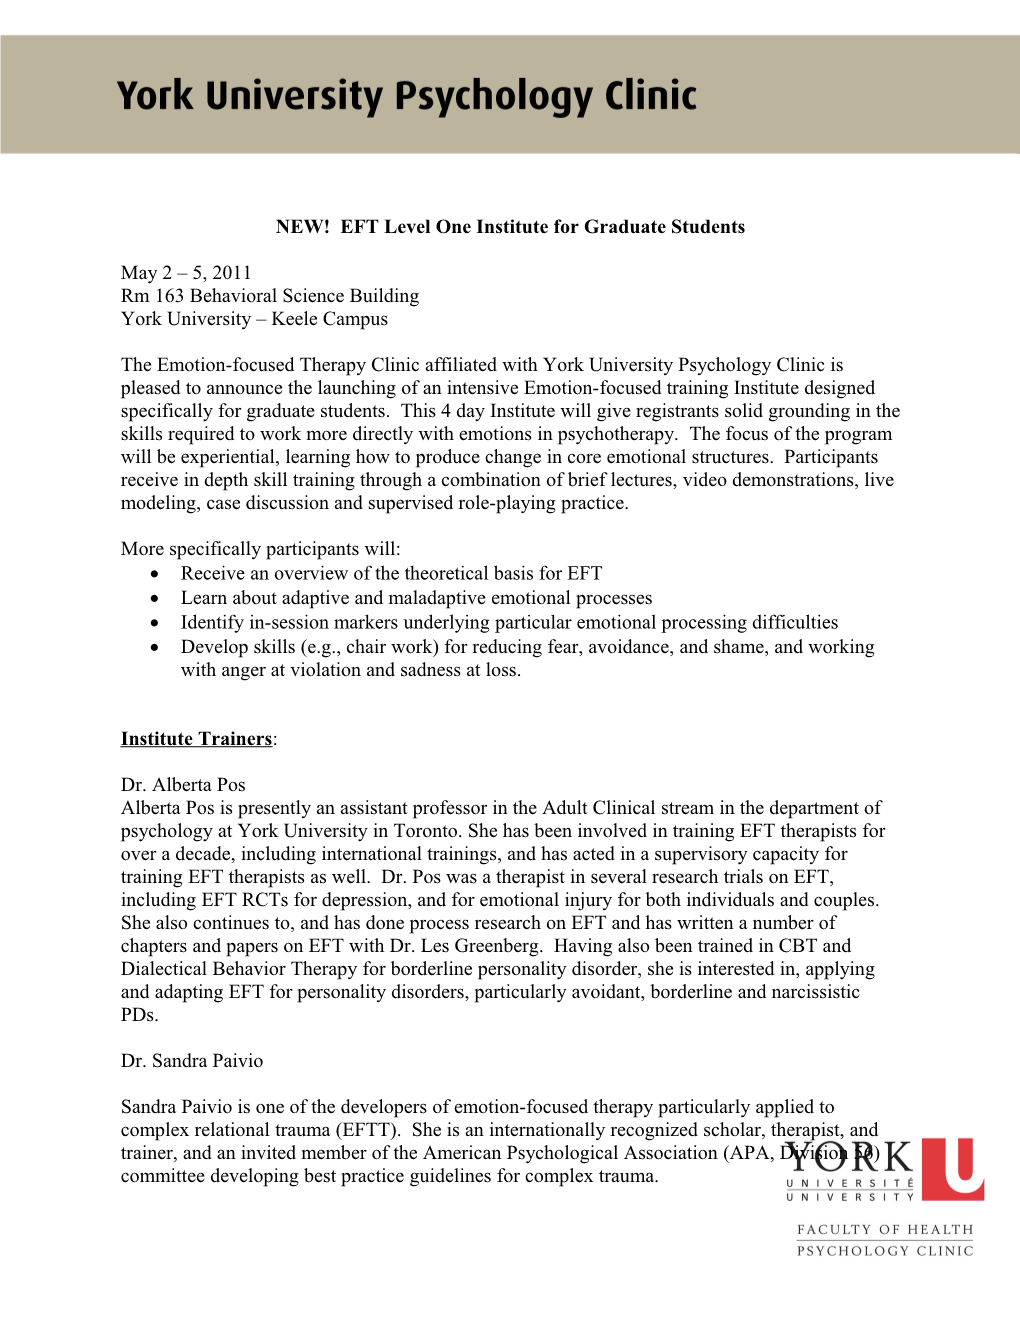 NEW! EFT Level One Institute for Graduate Students